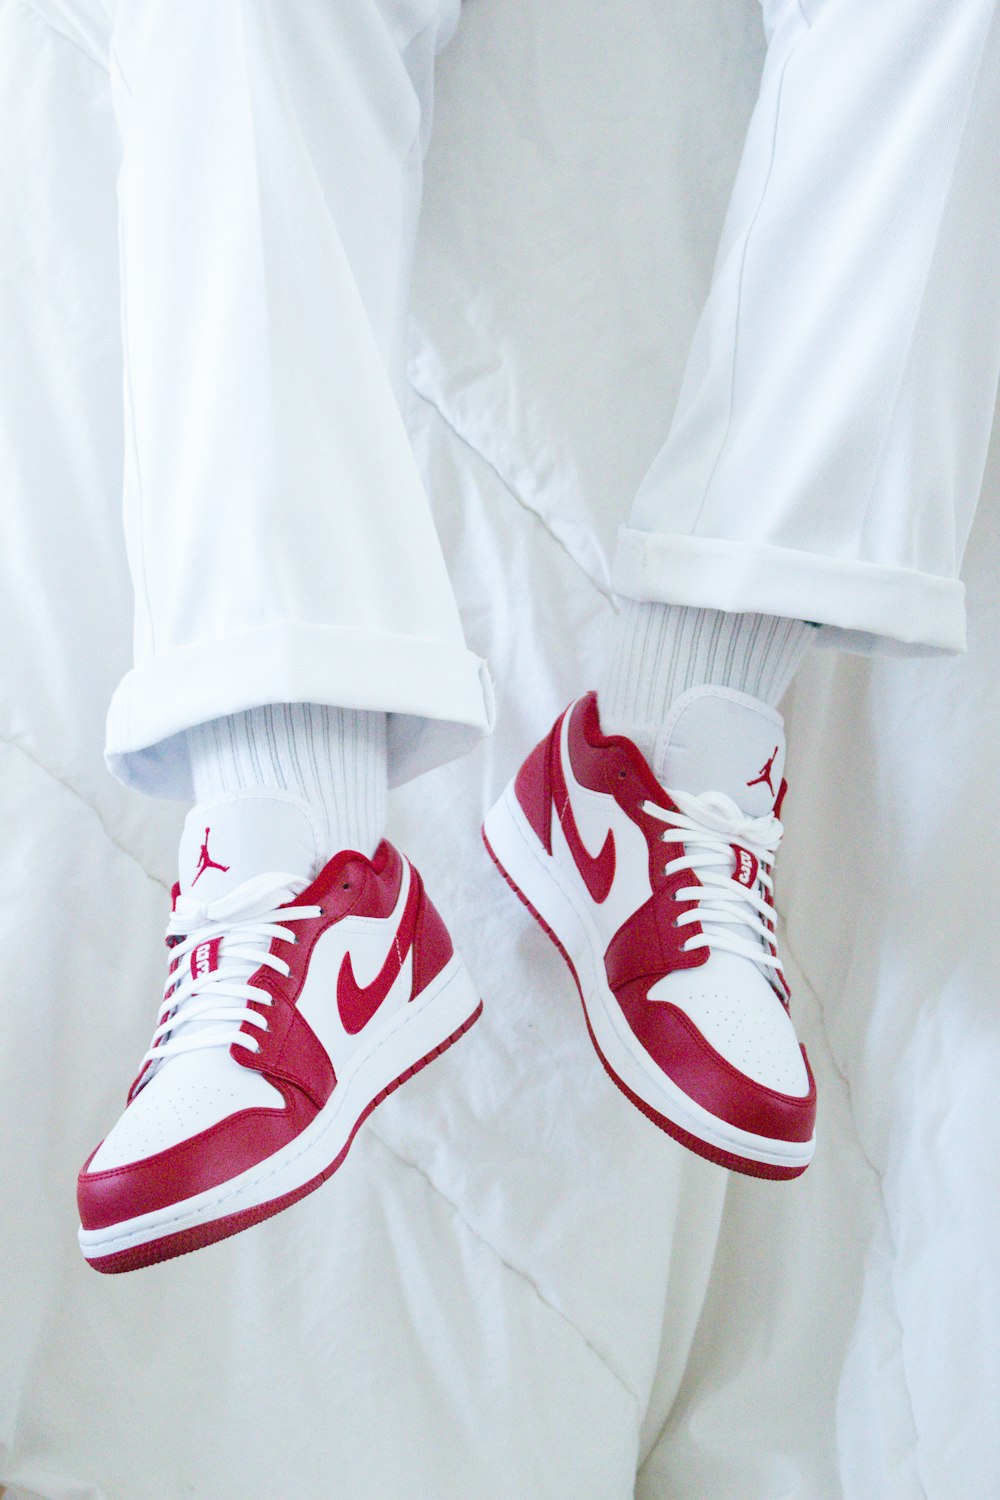 Red and white nike sneakers photo – Free France Image on Unsplash